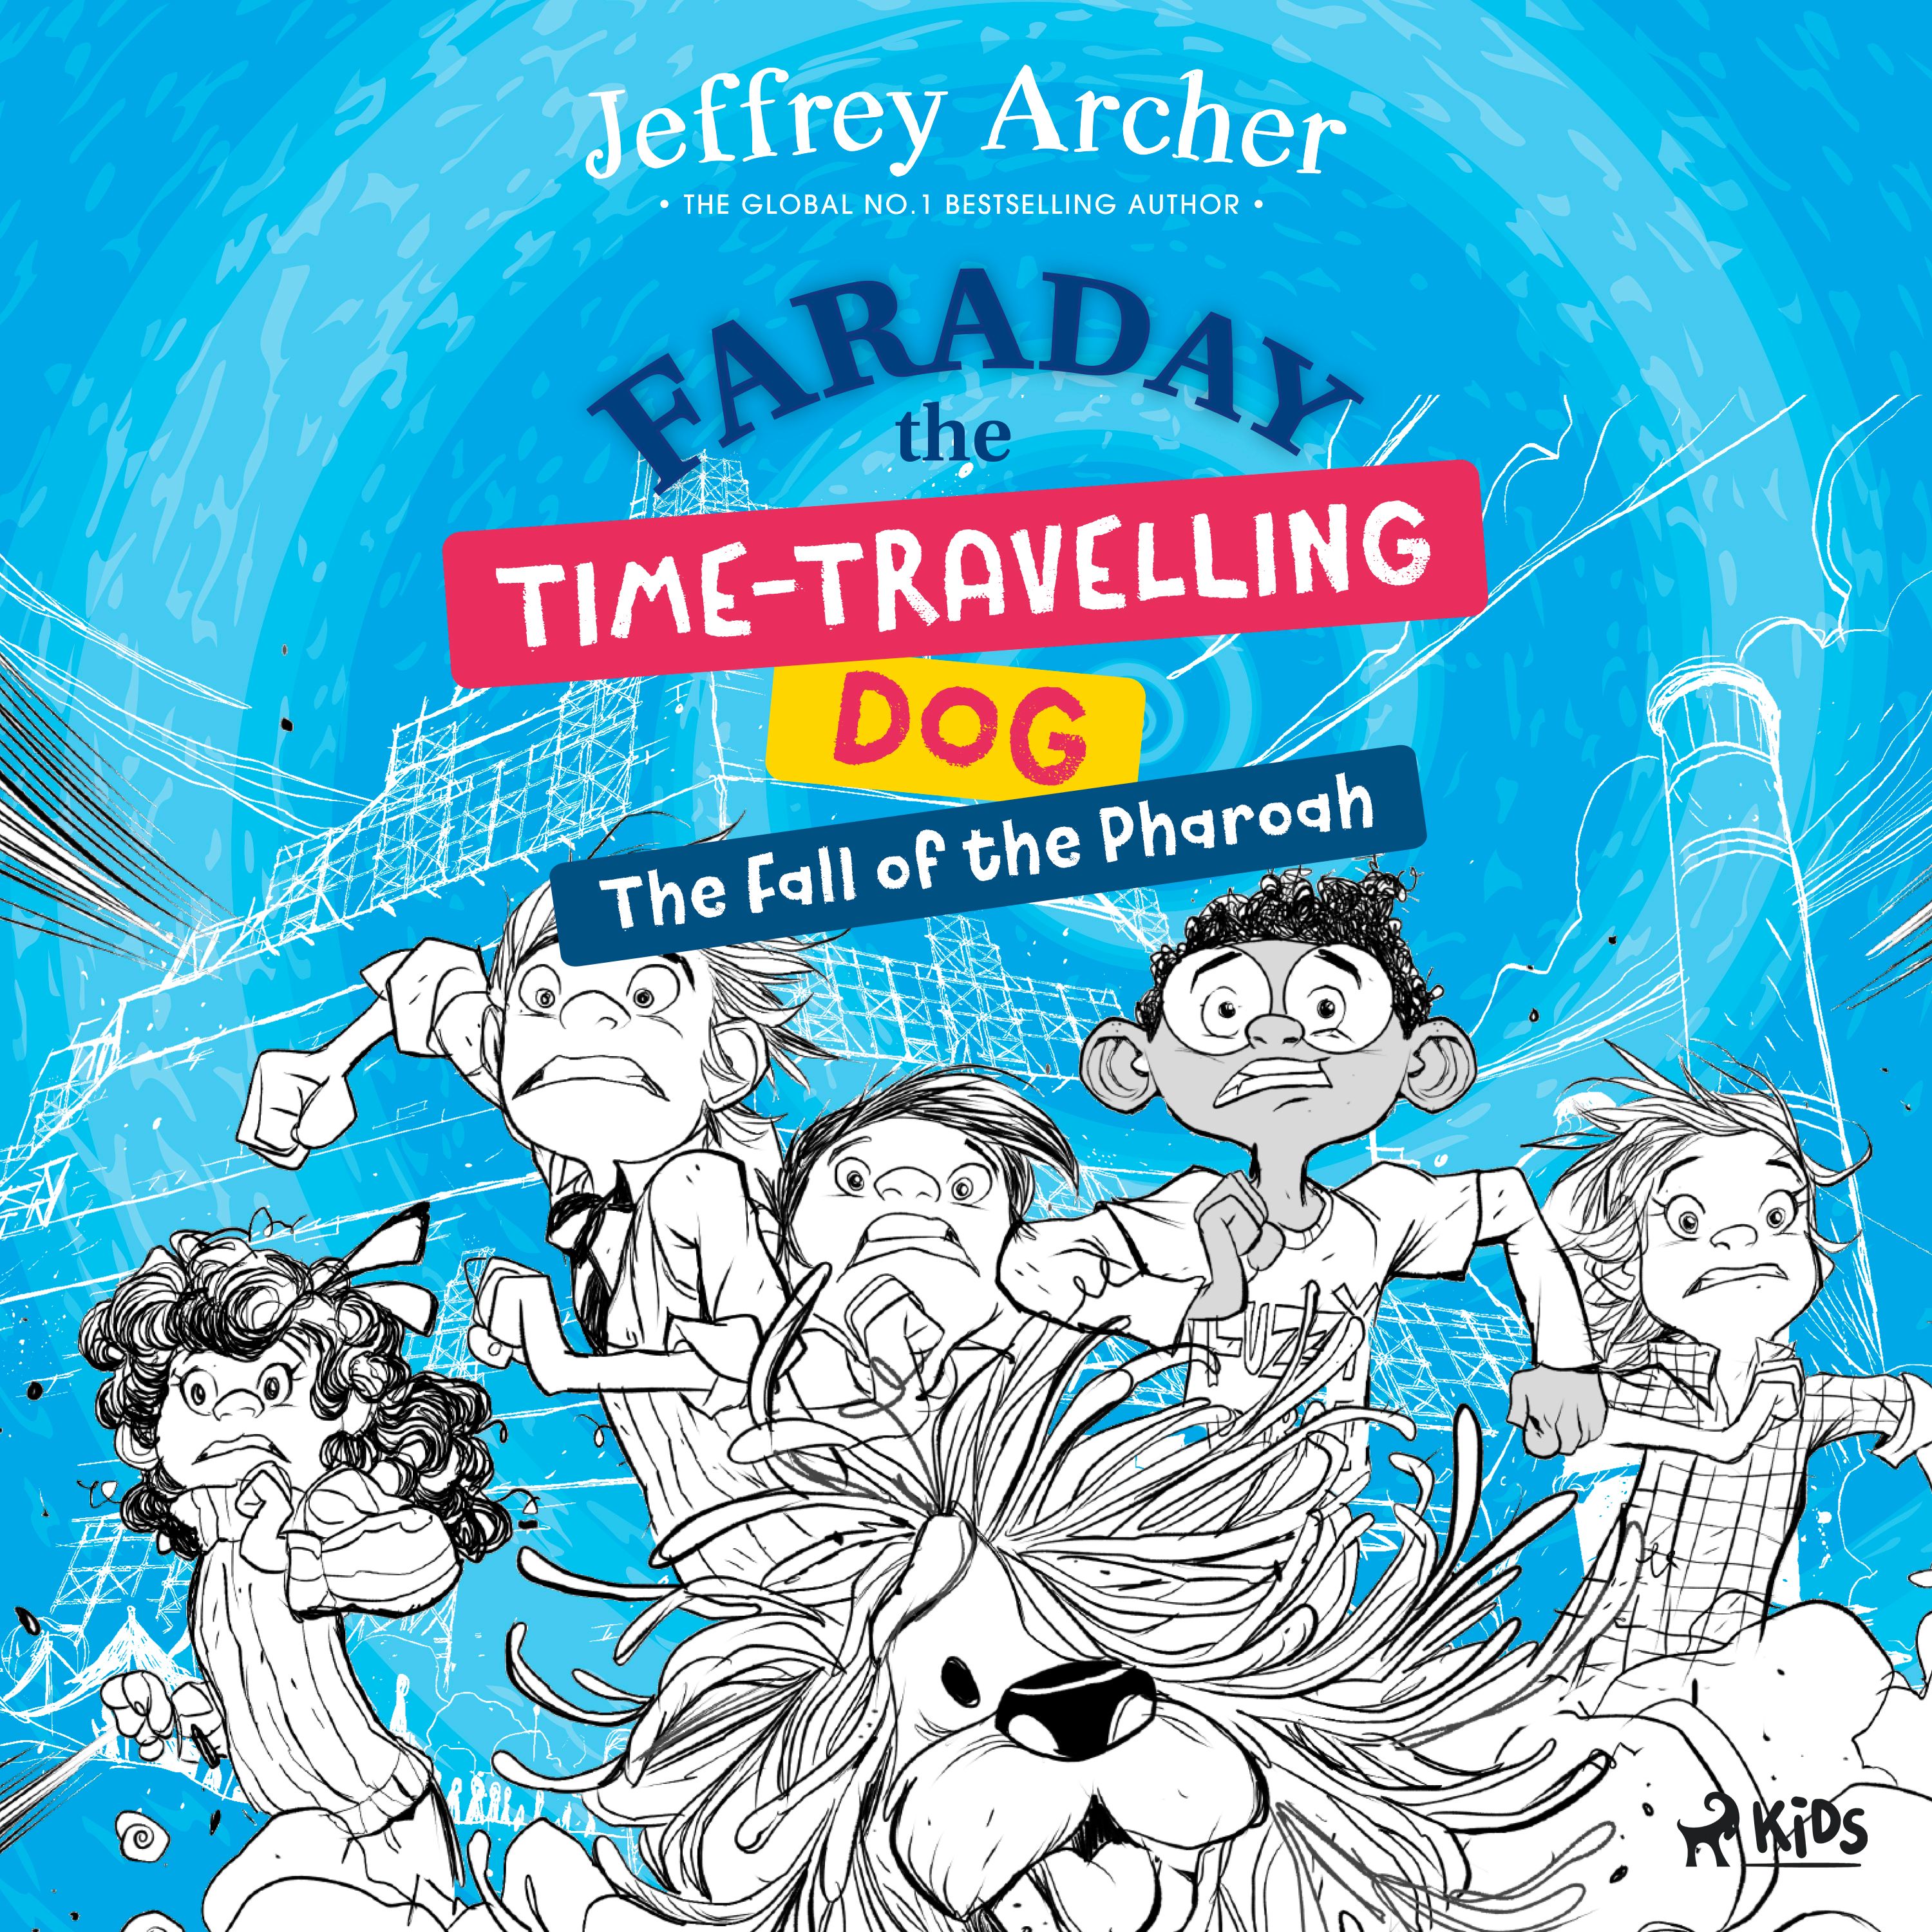 Faraday The Time-Travelling Dog: The Fall of the Pharoah, audiobook by Jeffrey Archer